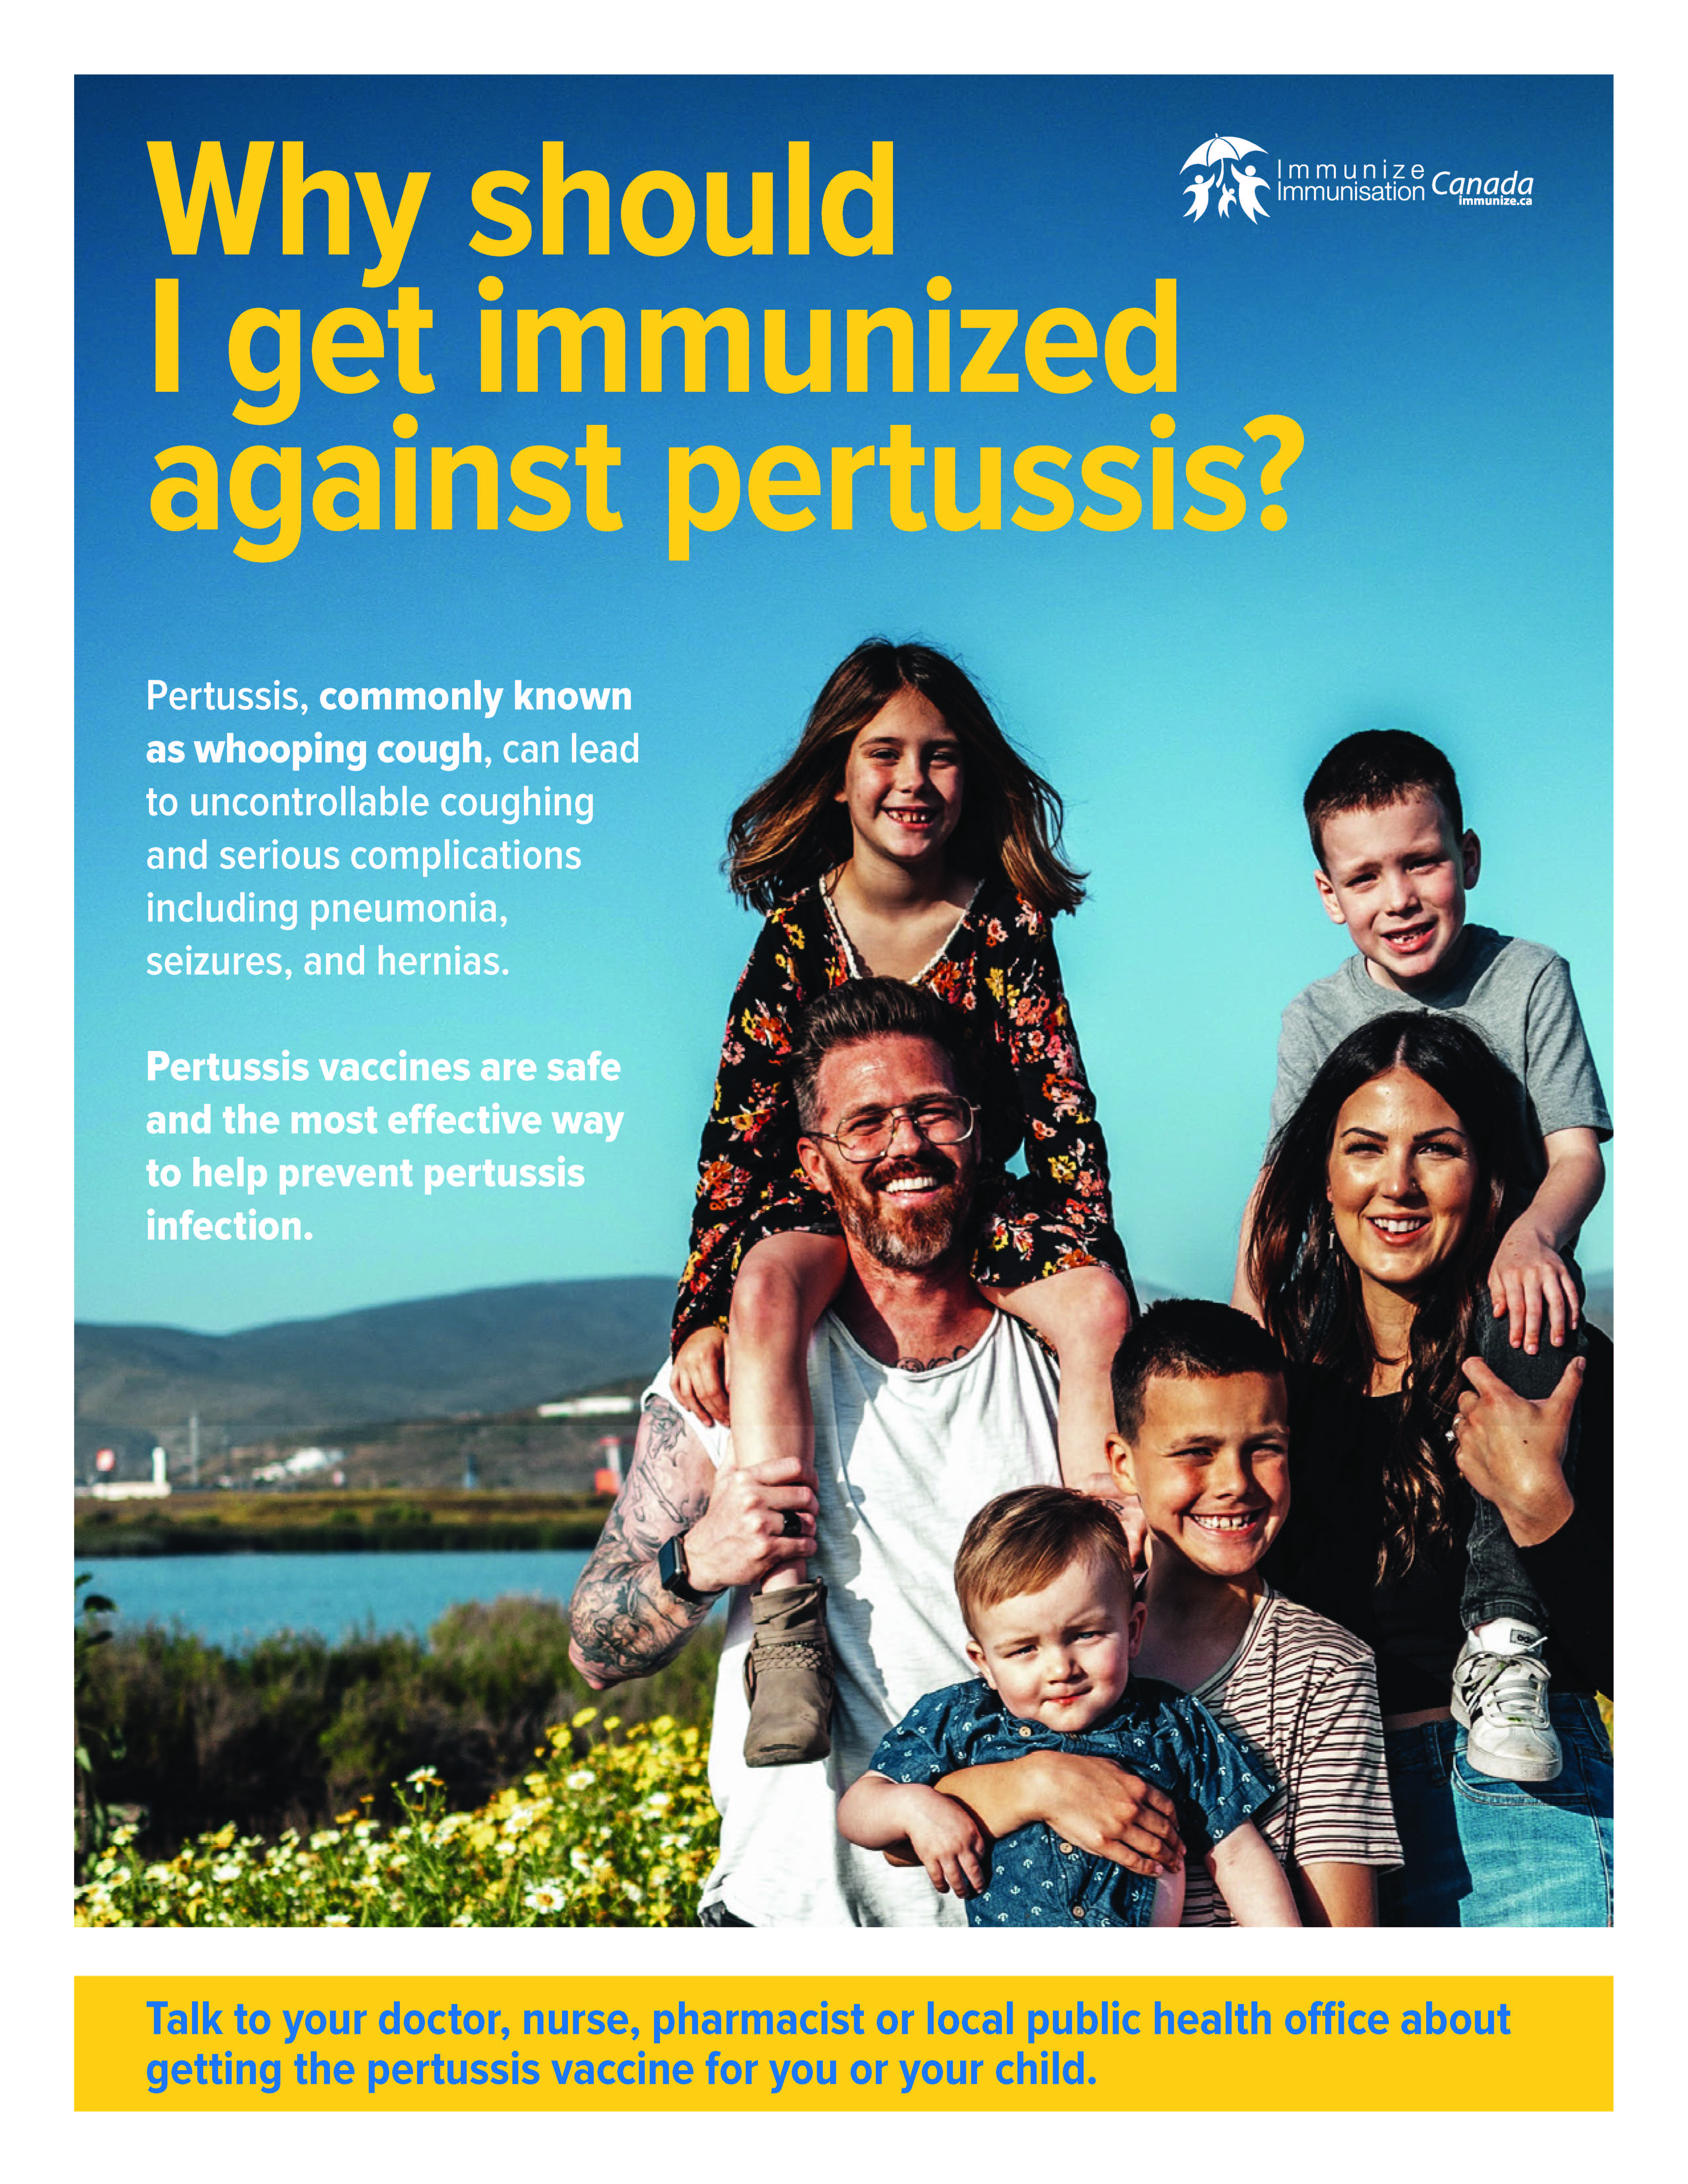 Why should I get immunized against pertussis?